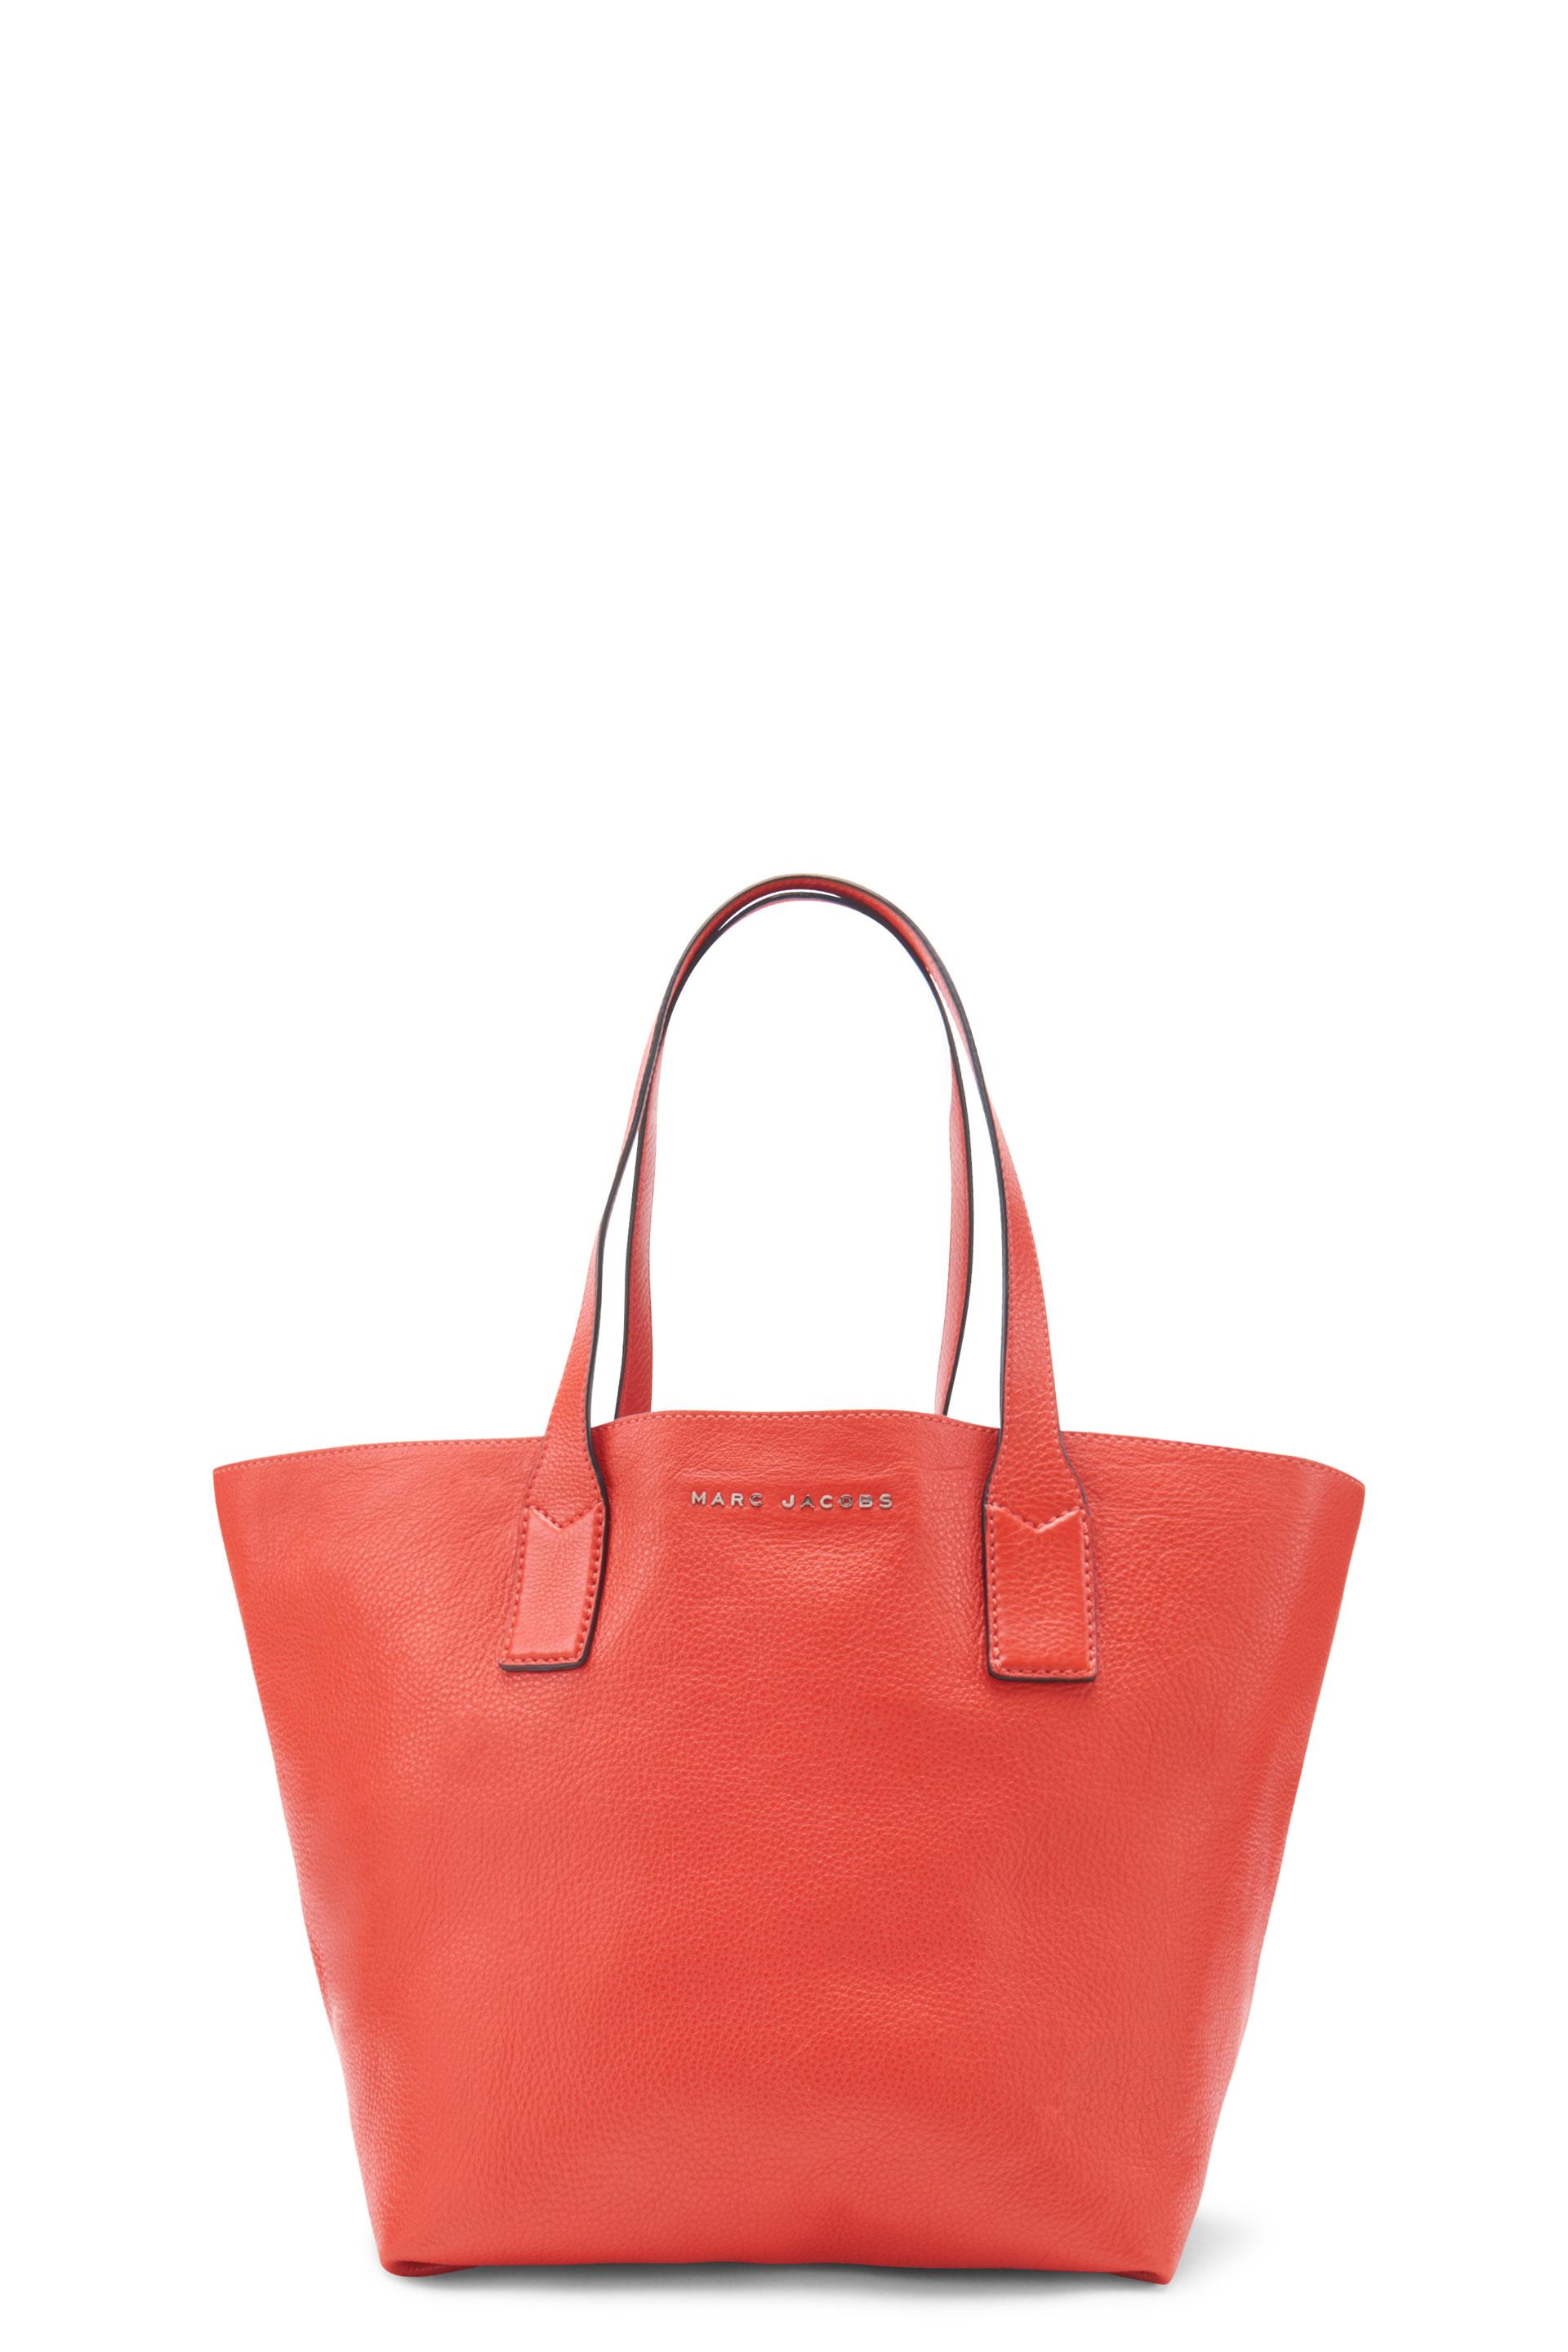 Marc Jacobs 'Wingman' Leather Shopping Tote In Bright Red Multi | ModeSens